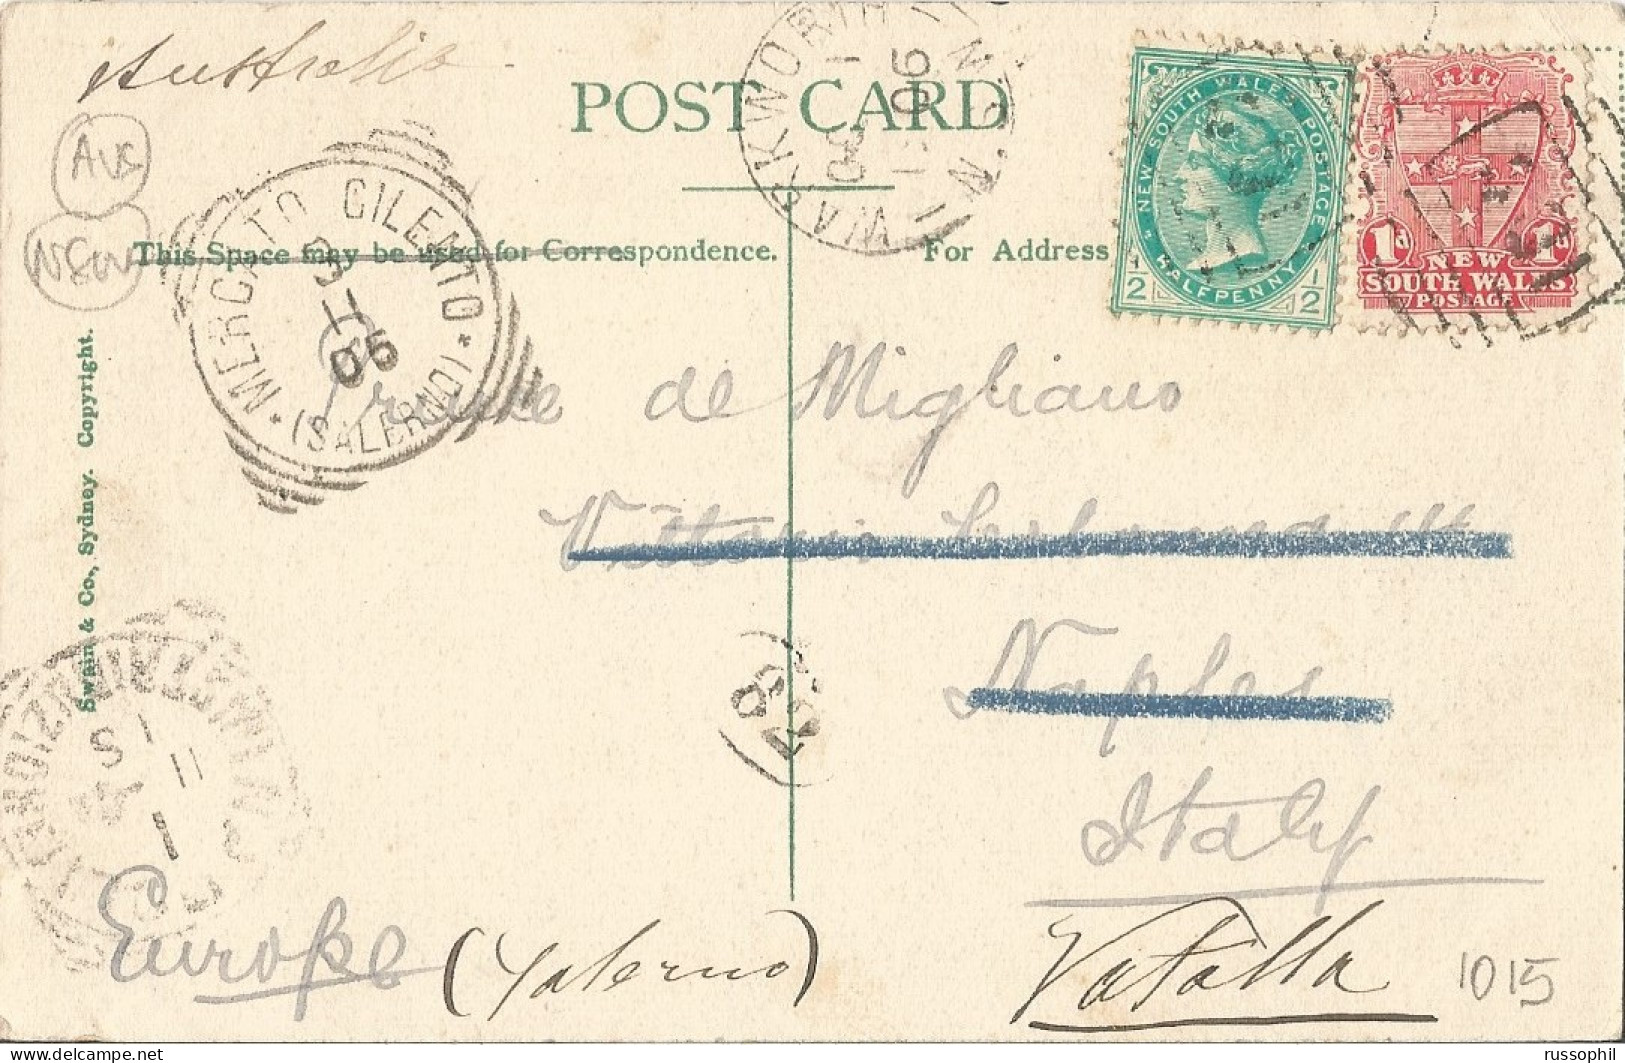 AUSTRALIA NSW - FRANKED PC (VIEW OF SYDNEY) FROM WARKWORTH TO ITALY - BARRED NUMERAL CANCEL 401 - 1905 - Lettres & Documents